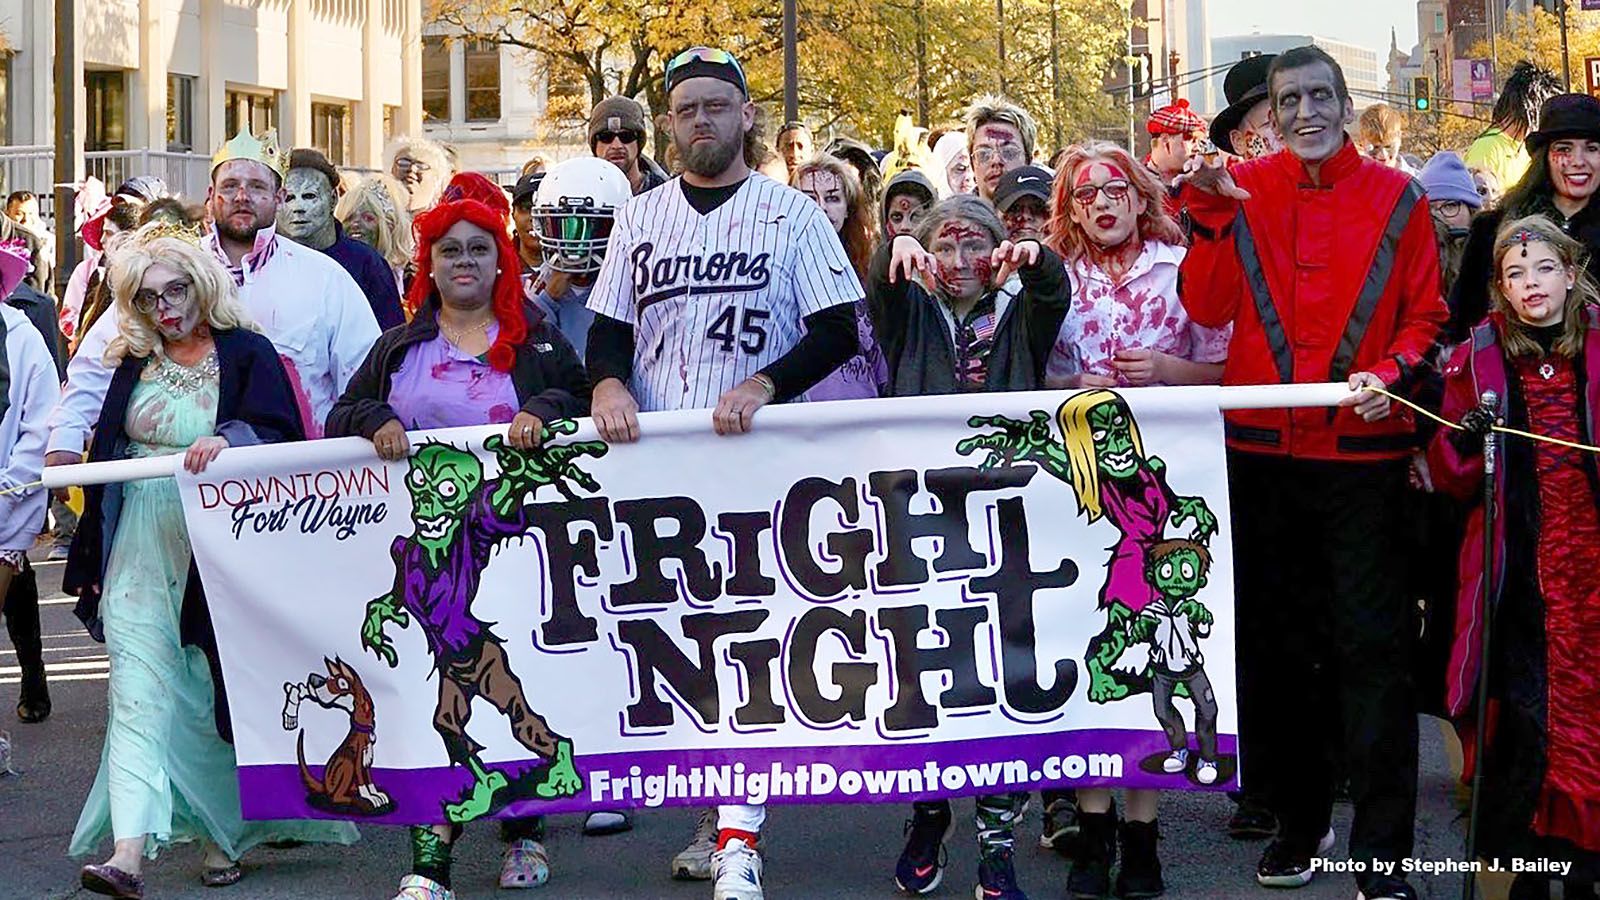 The Zombie Walk is a highlight of Downtown Fort Wayne’s annual Fright Night on Oct. 21.